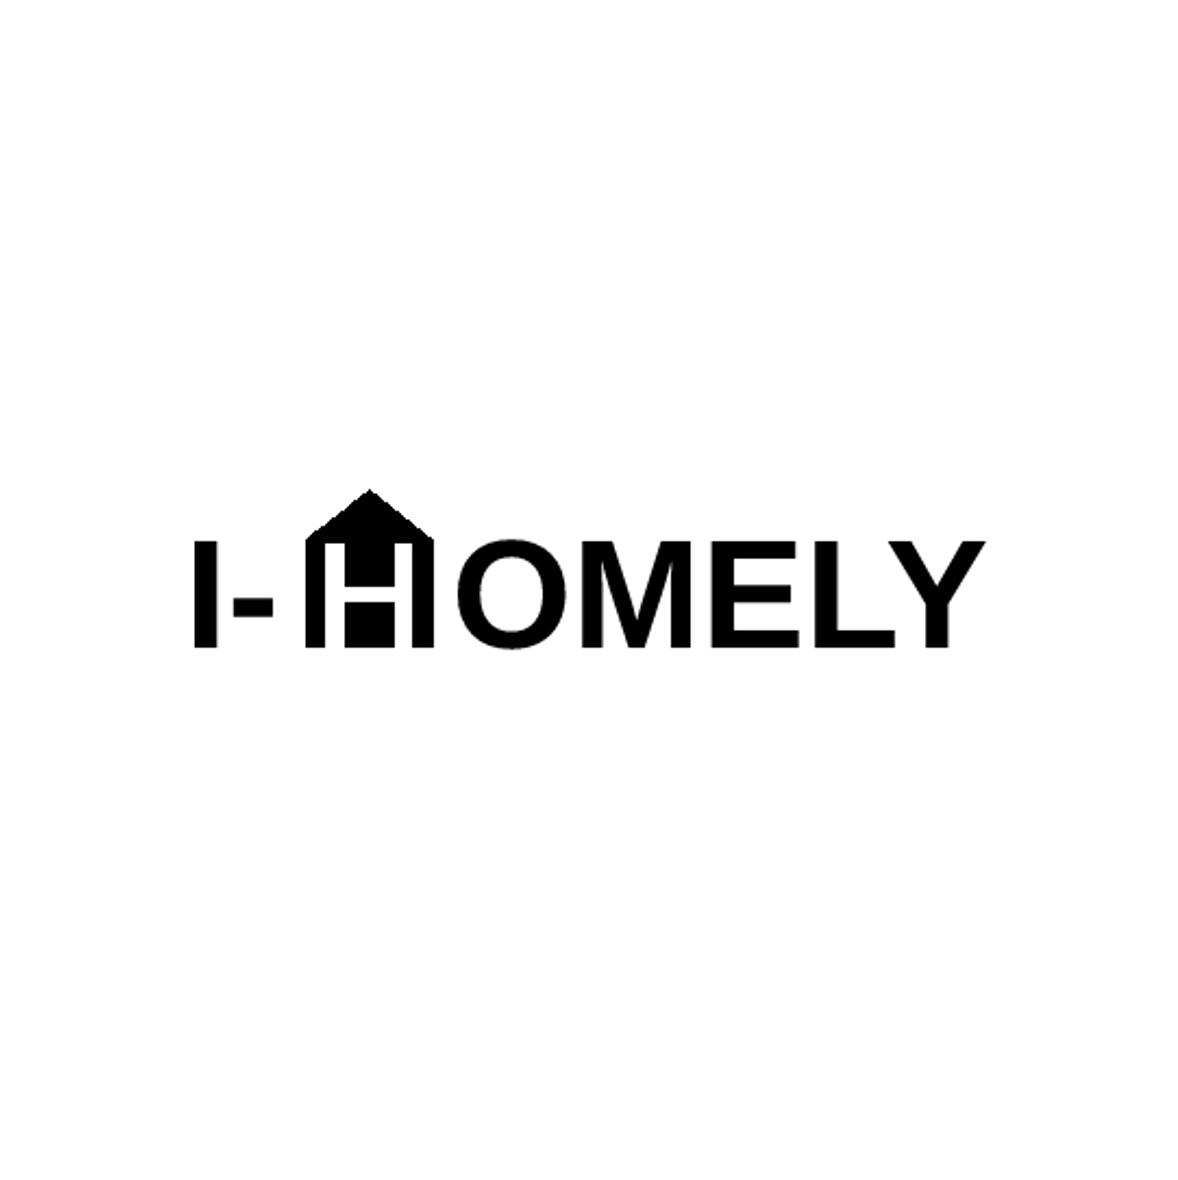 logo-ihomely.png